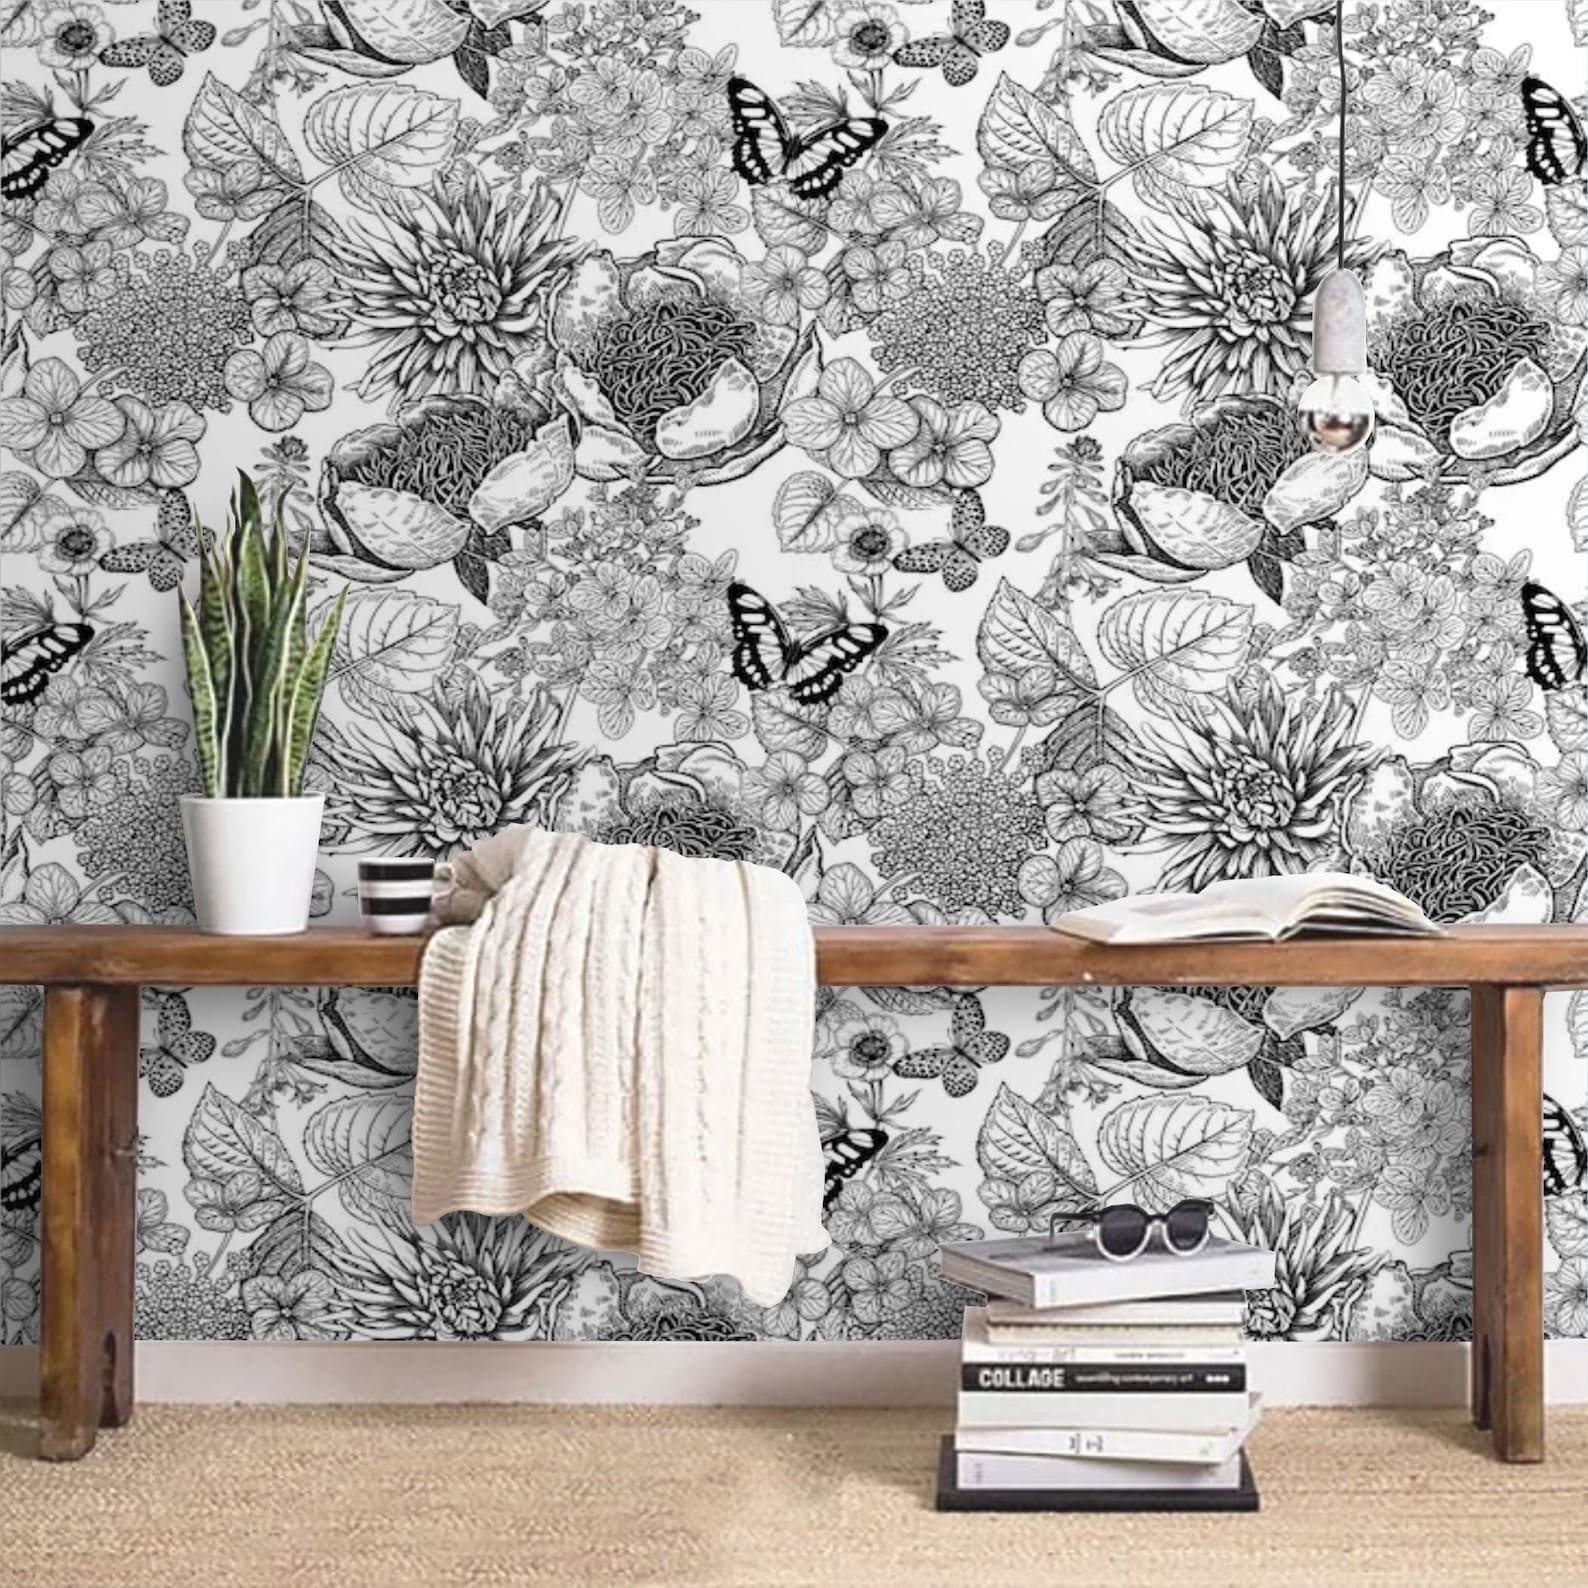 Floral Wallpaper Black and White Botanical Wall Paper | Etsy